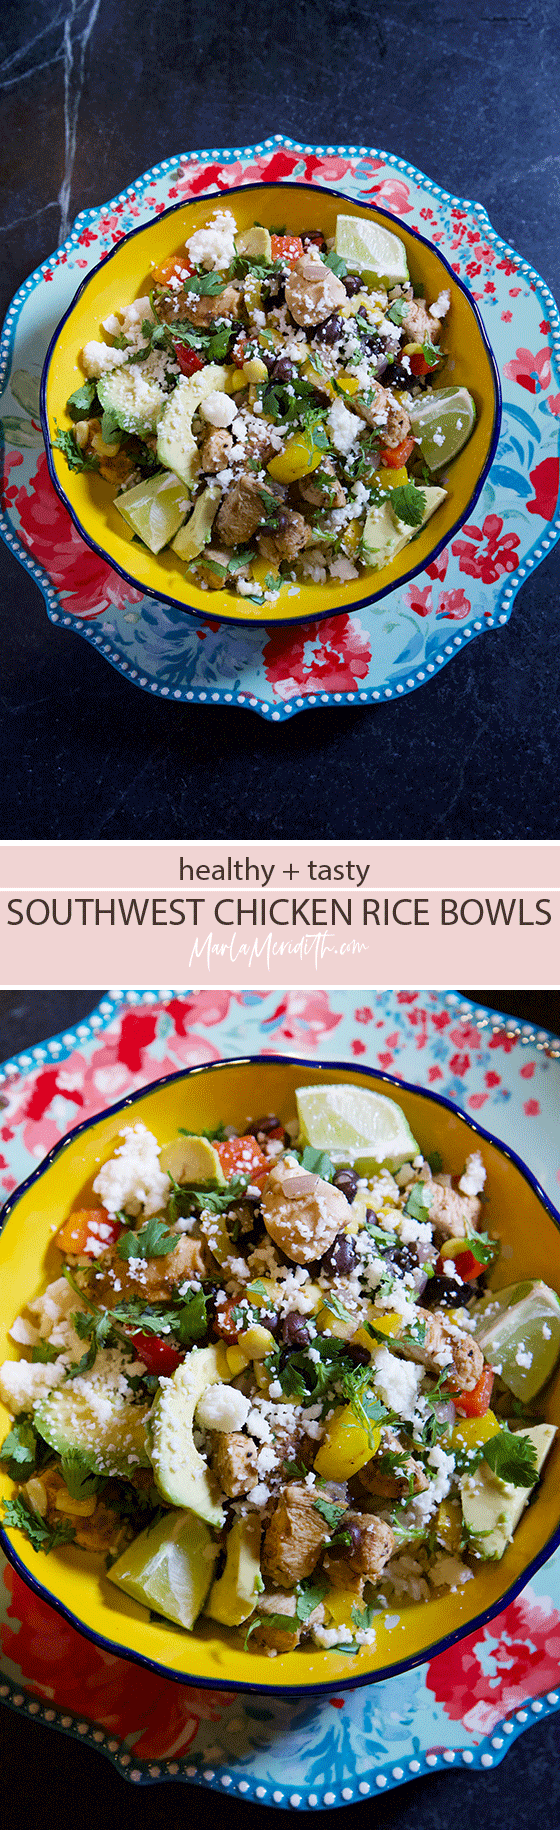 Delicious and healthy Southwest Chicken and Rice Bowls recipe